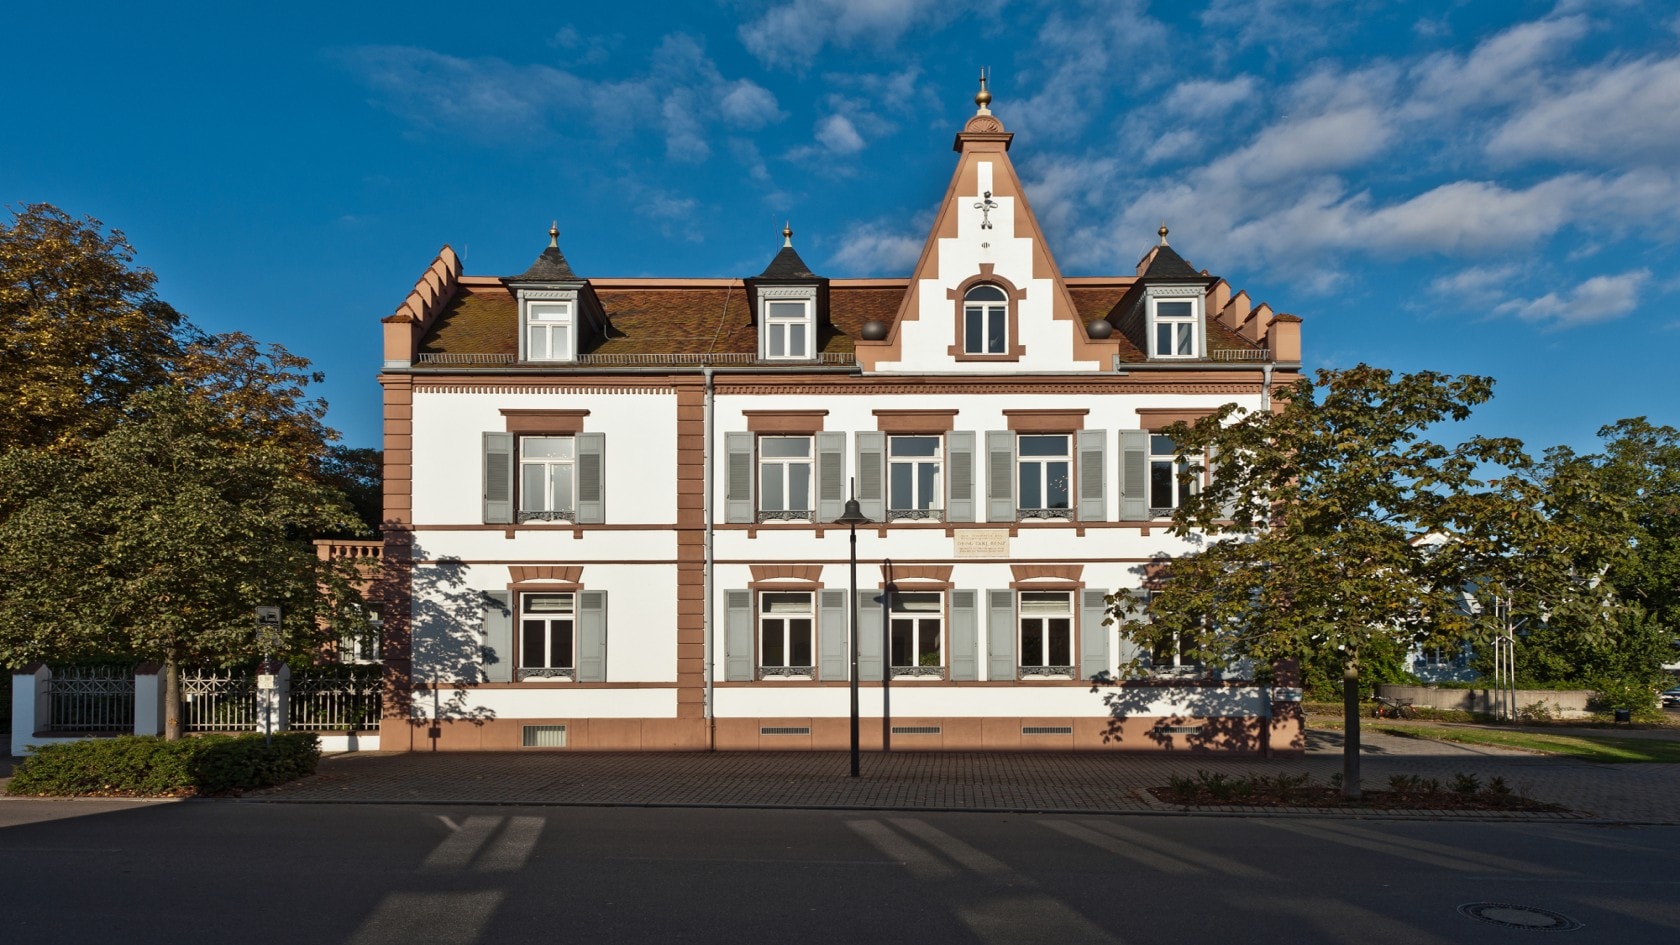 Investing extensive efforts in renovation, in 1985 Daimler-Benz AG restored the Benz House in Ladenburg, the last residence of inventor Carl Benz, to almost original condition